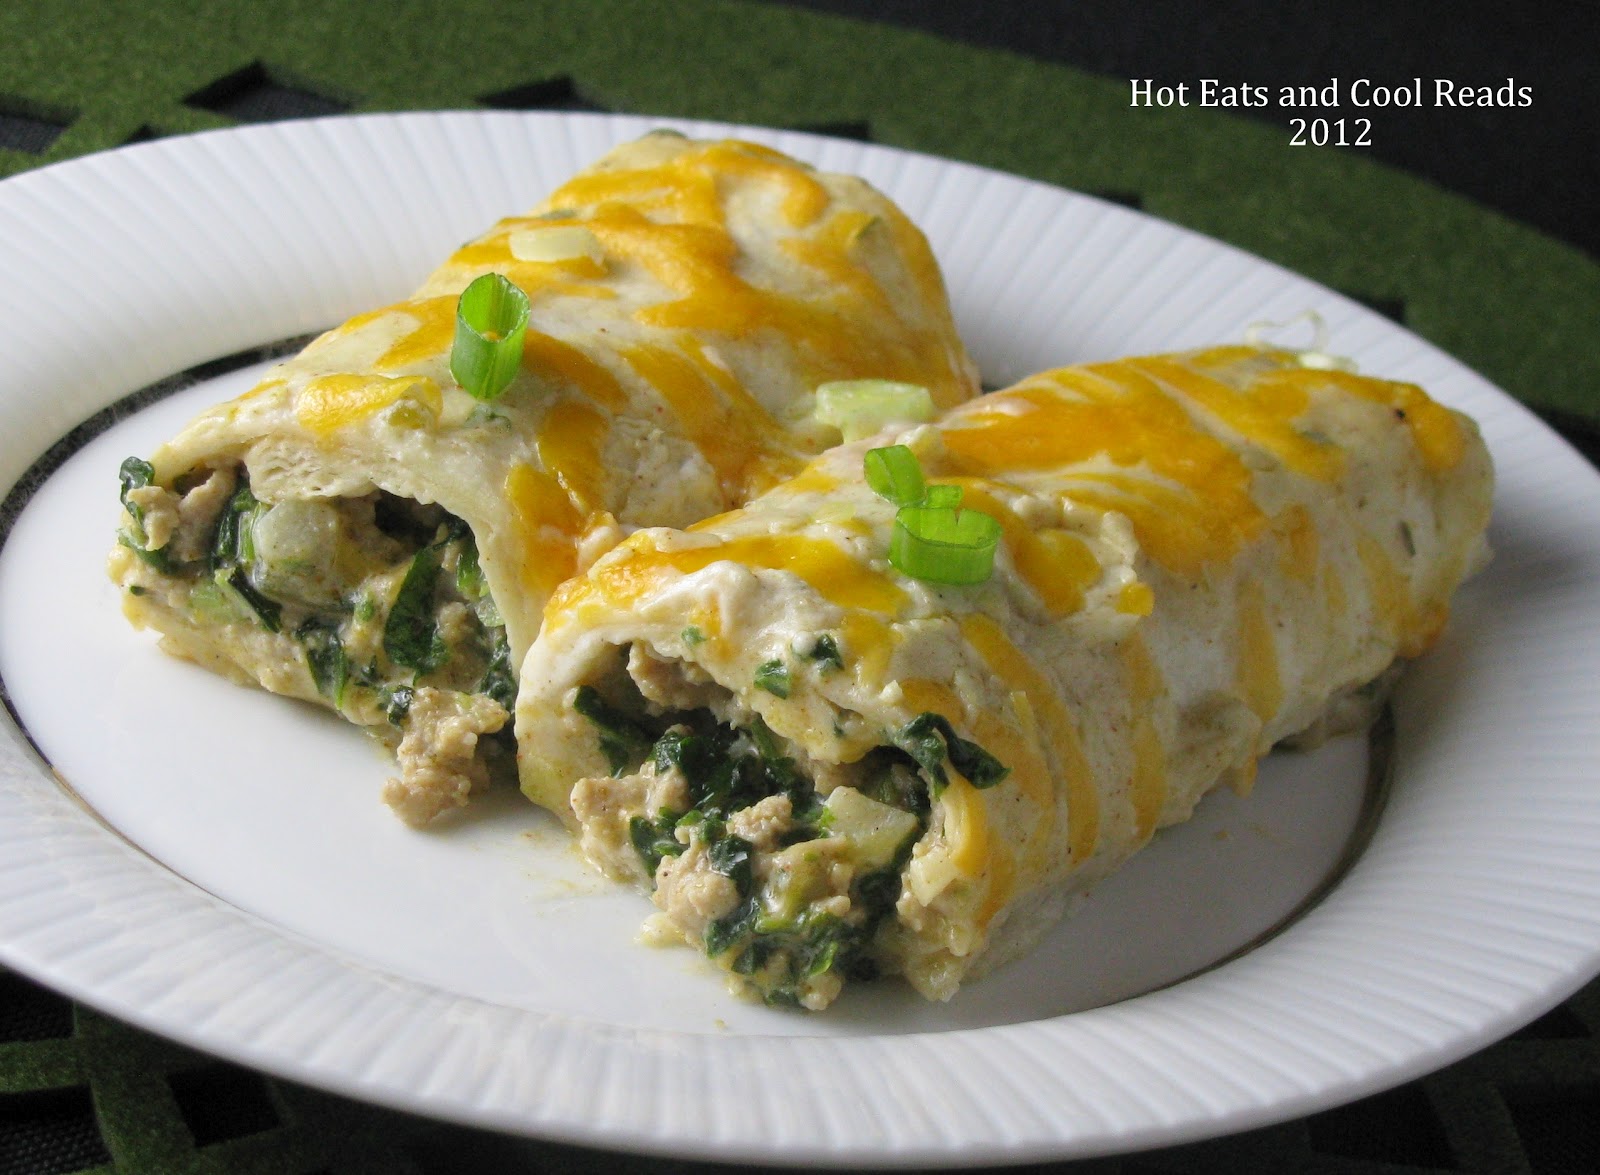 Hot Eats and Cool Reads: Creamy Chicken and Spinach Enchiladas Recipe